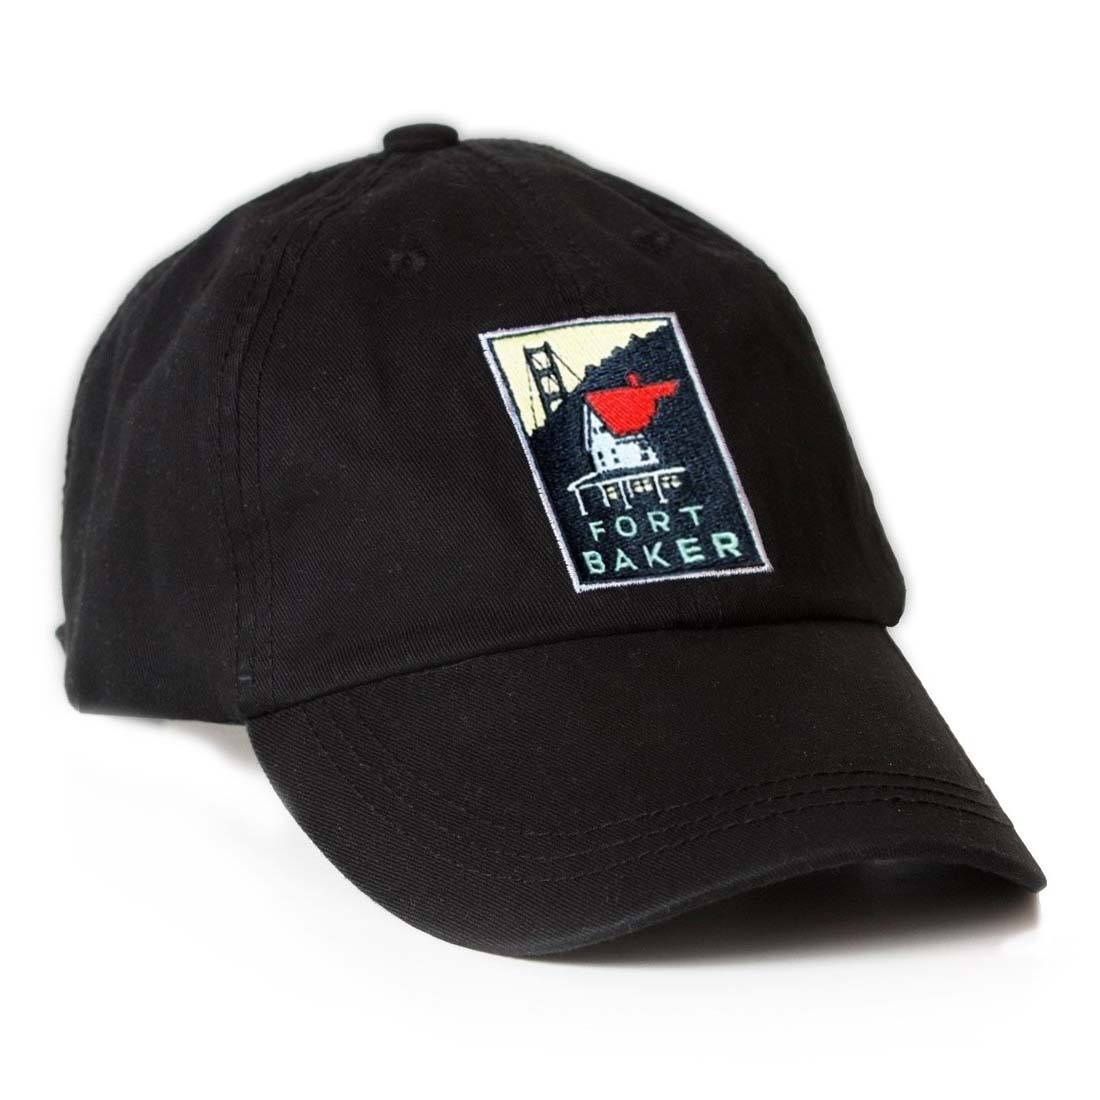 Black baseball cap with embroidered Fort Baker design, art by Michael Schwab, produced by the Golden Gate National Parks Conservancy